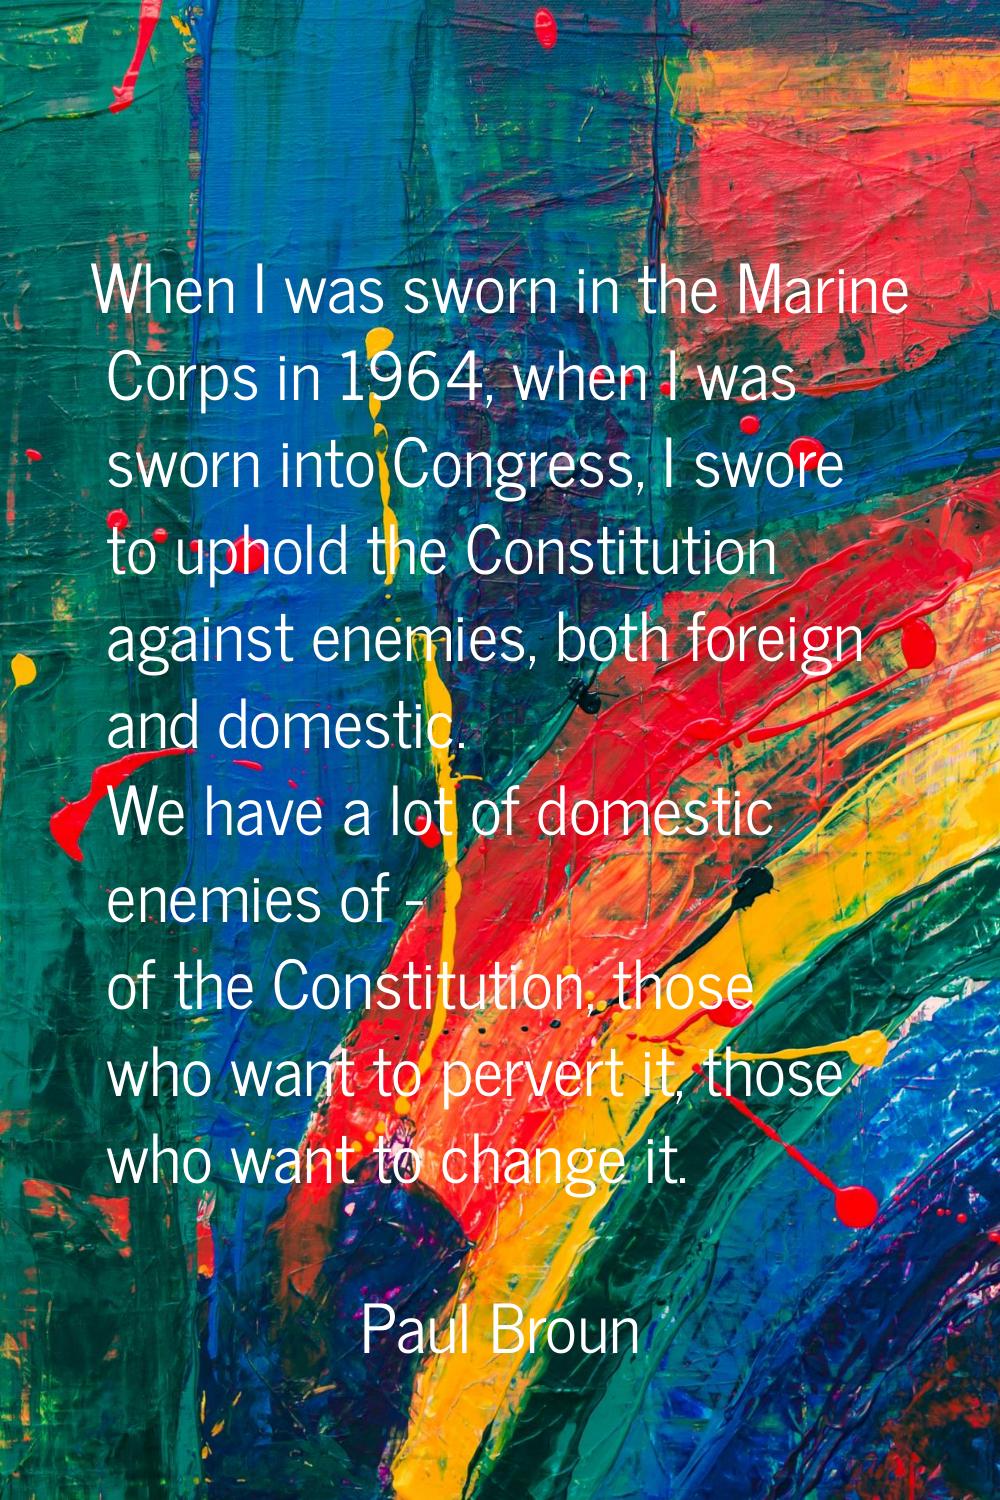 When I was sworn in the Marine Corps in 1964, when I was sworn into Congress, I swore to uphold the